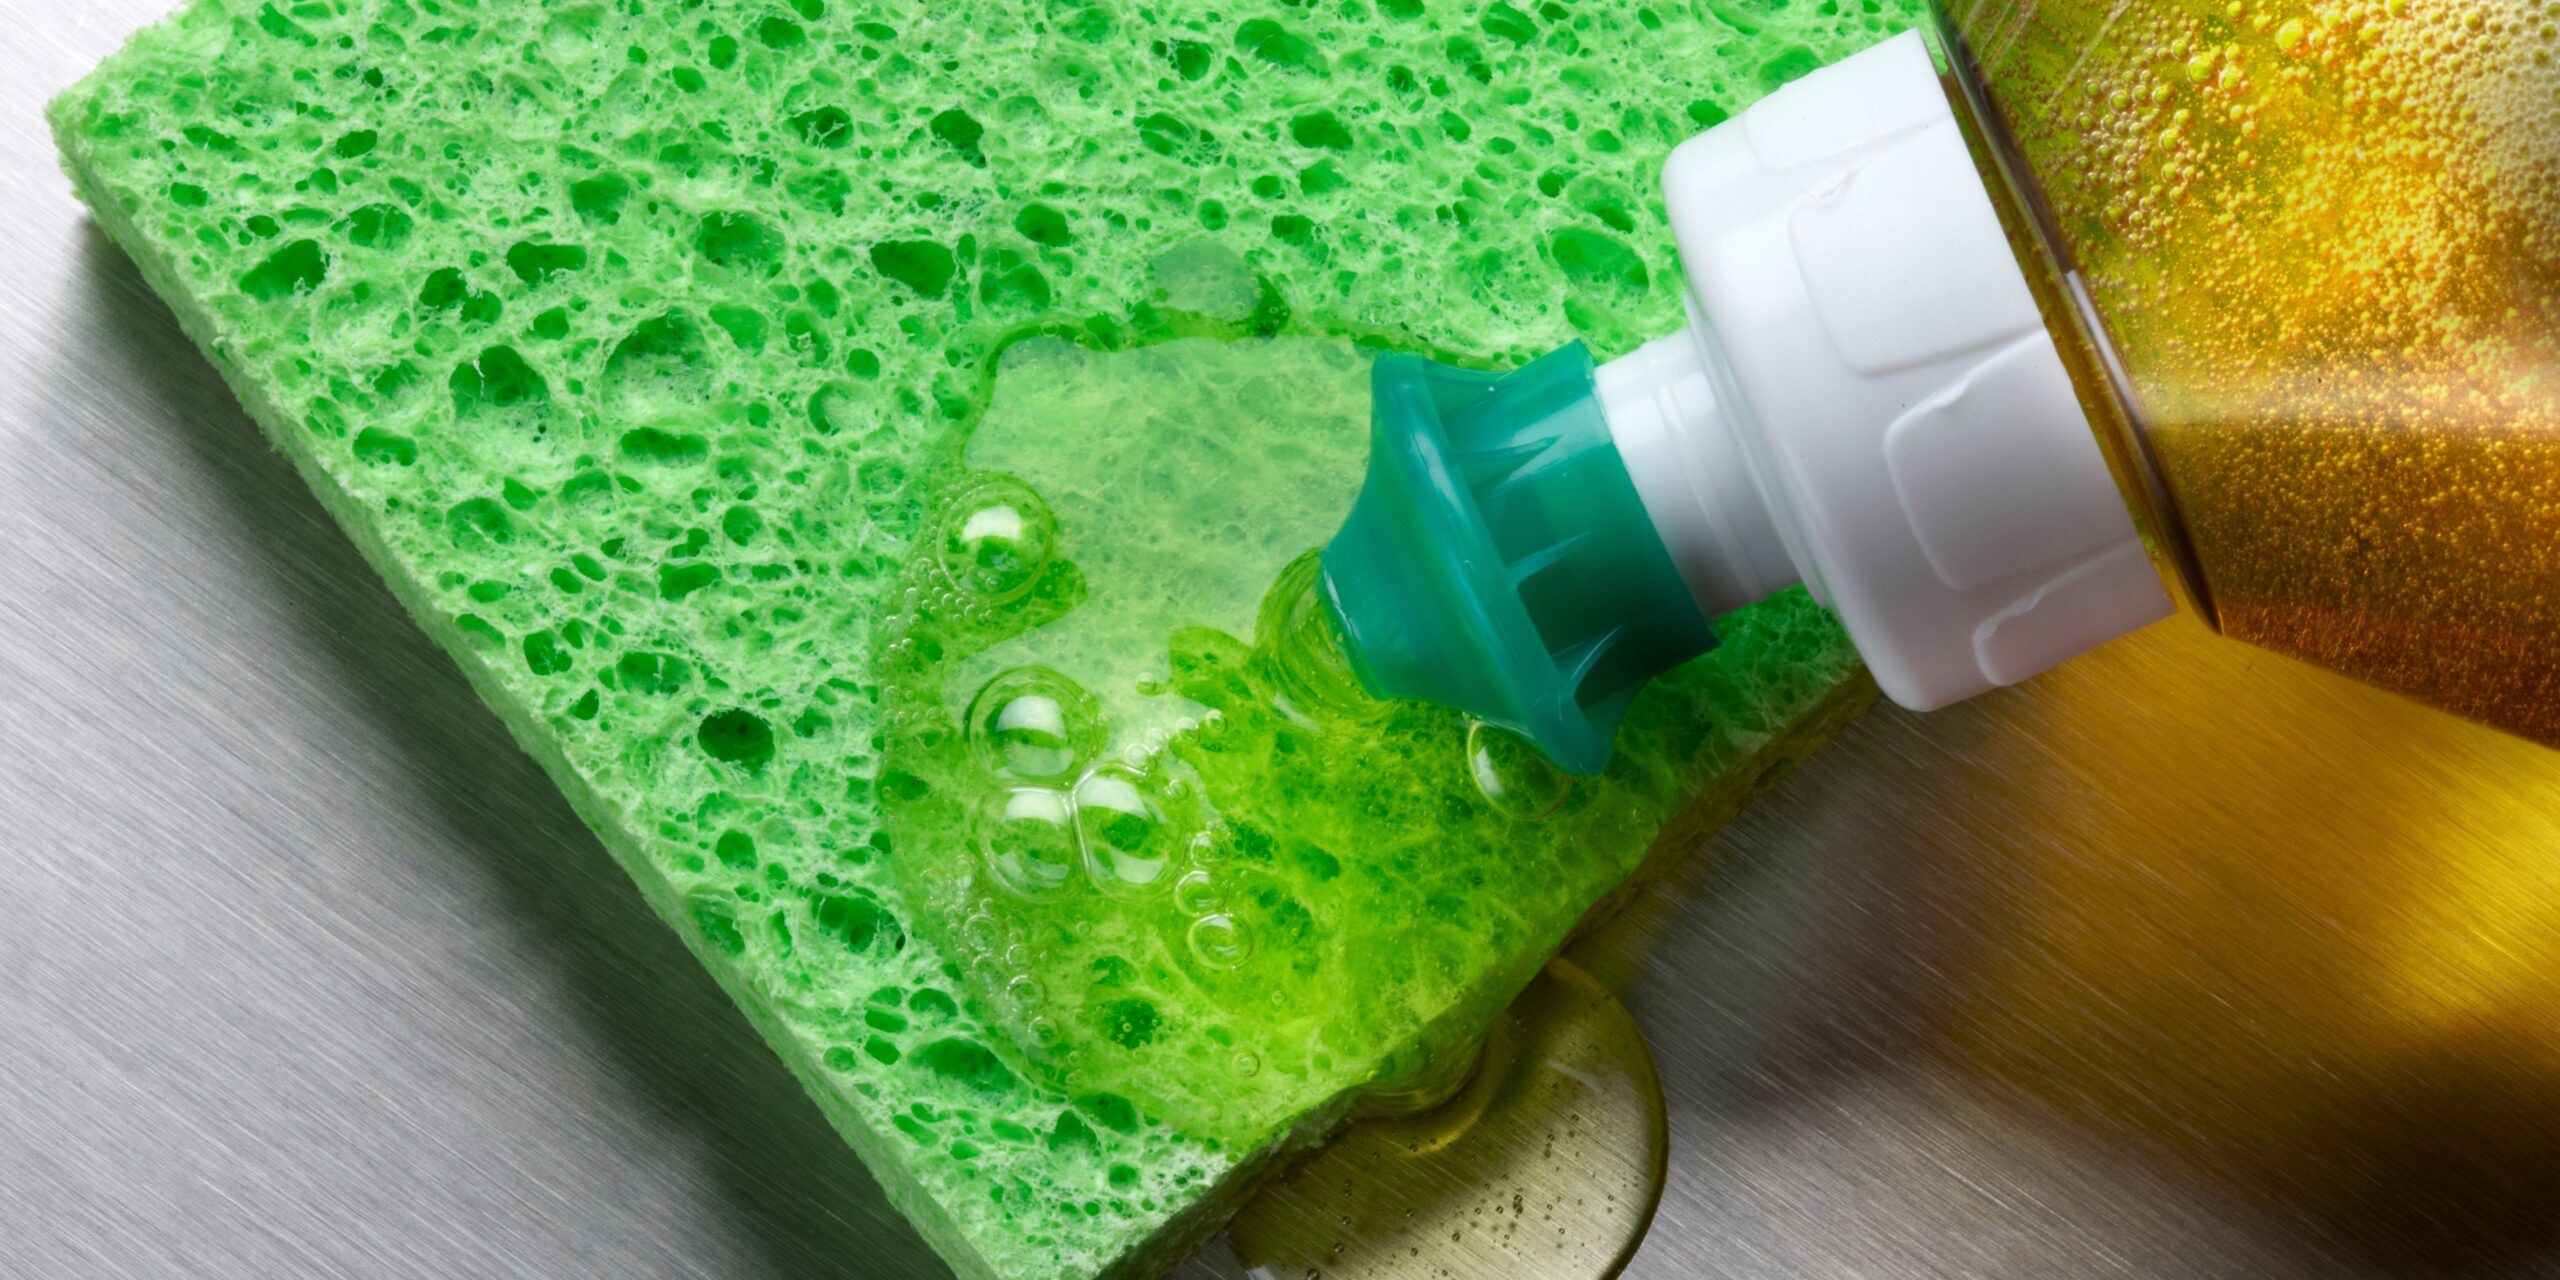 Best Dish Soaps For Squeaky Clean Dishes